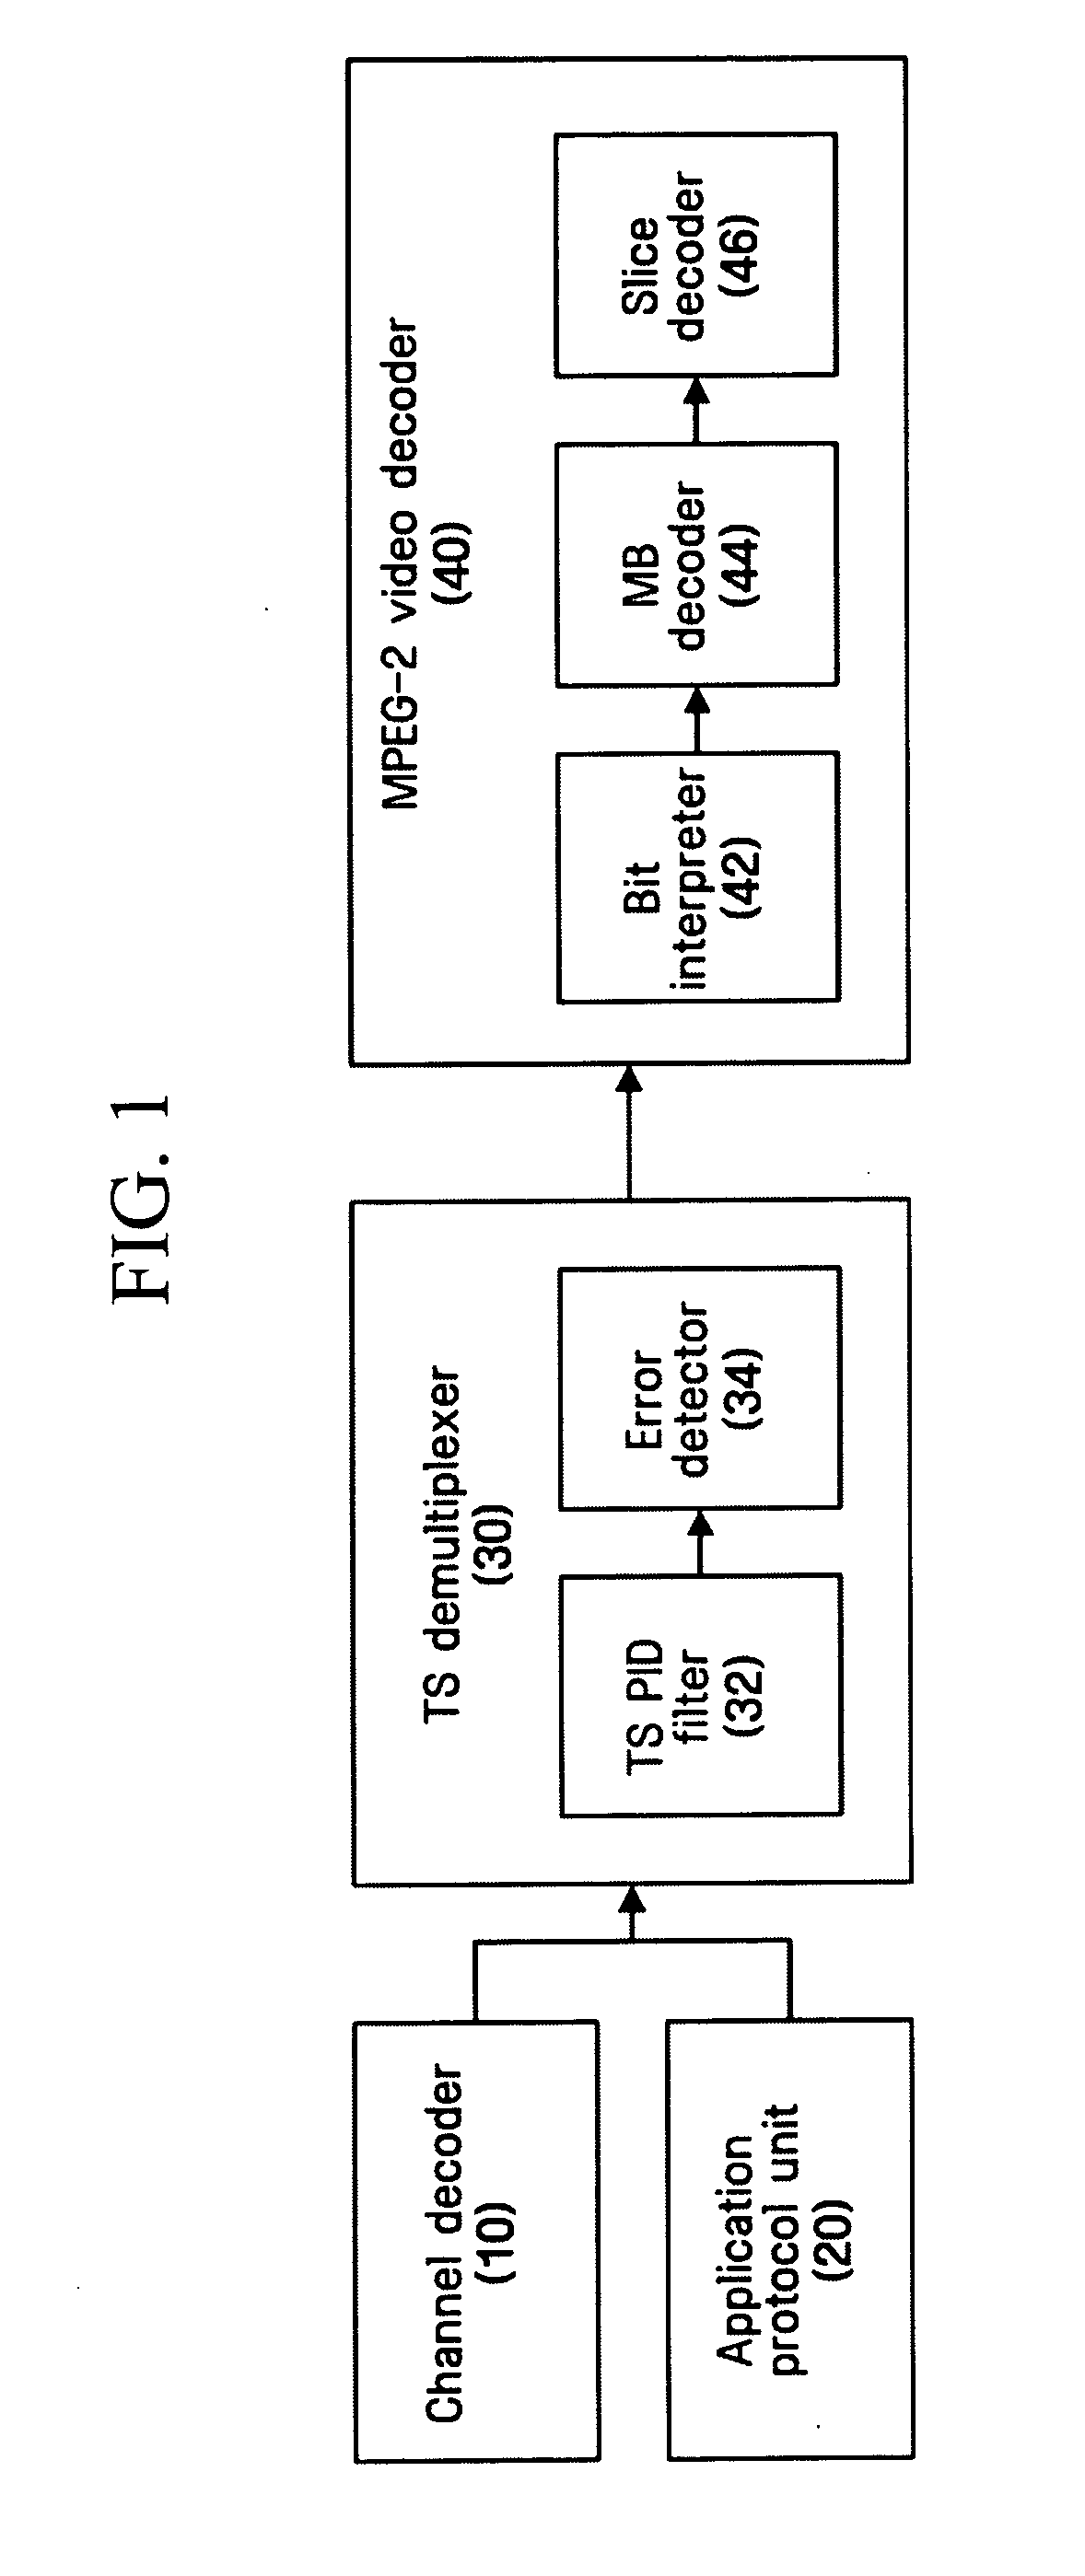 Video decoding method and apparatus for providing error detection